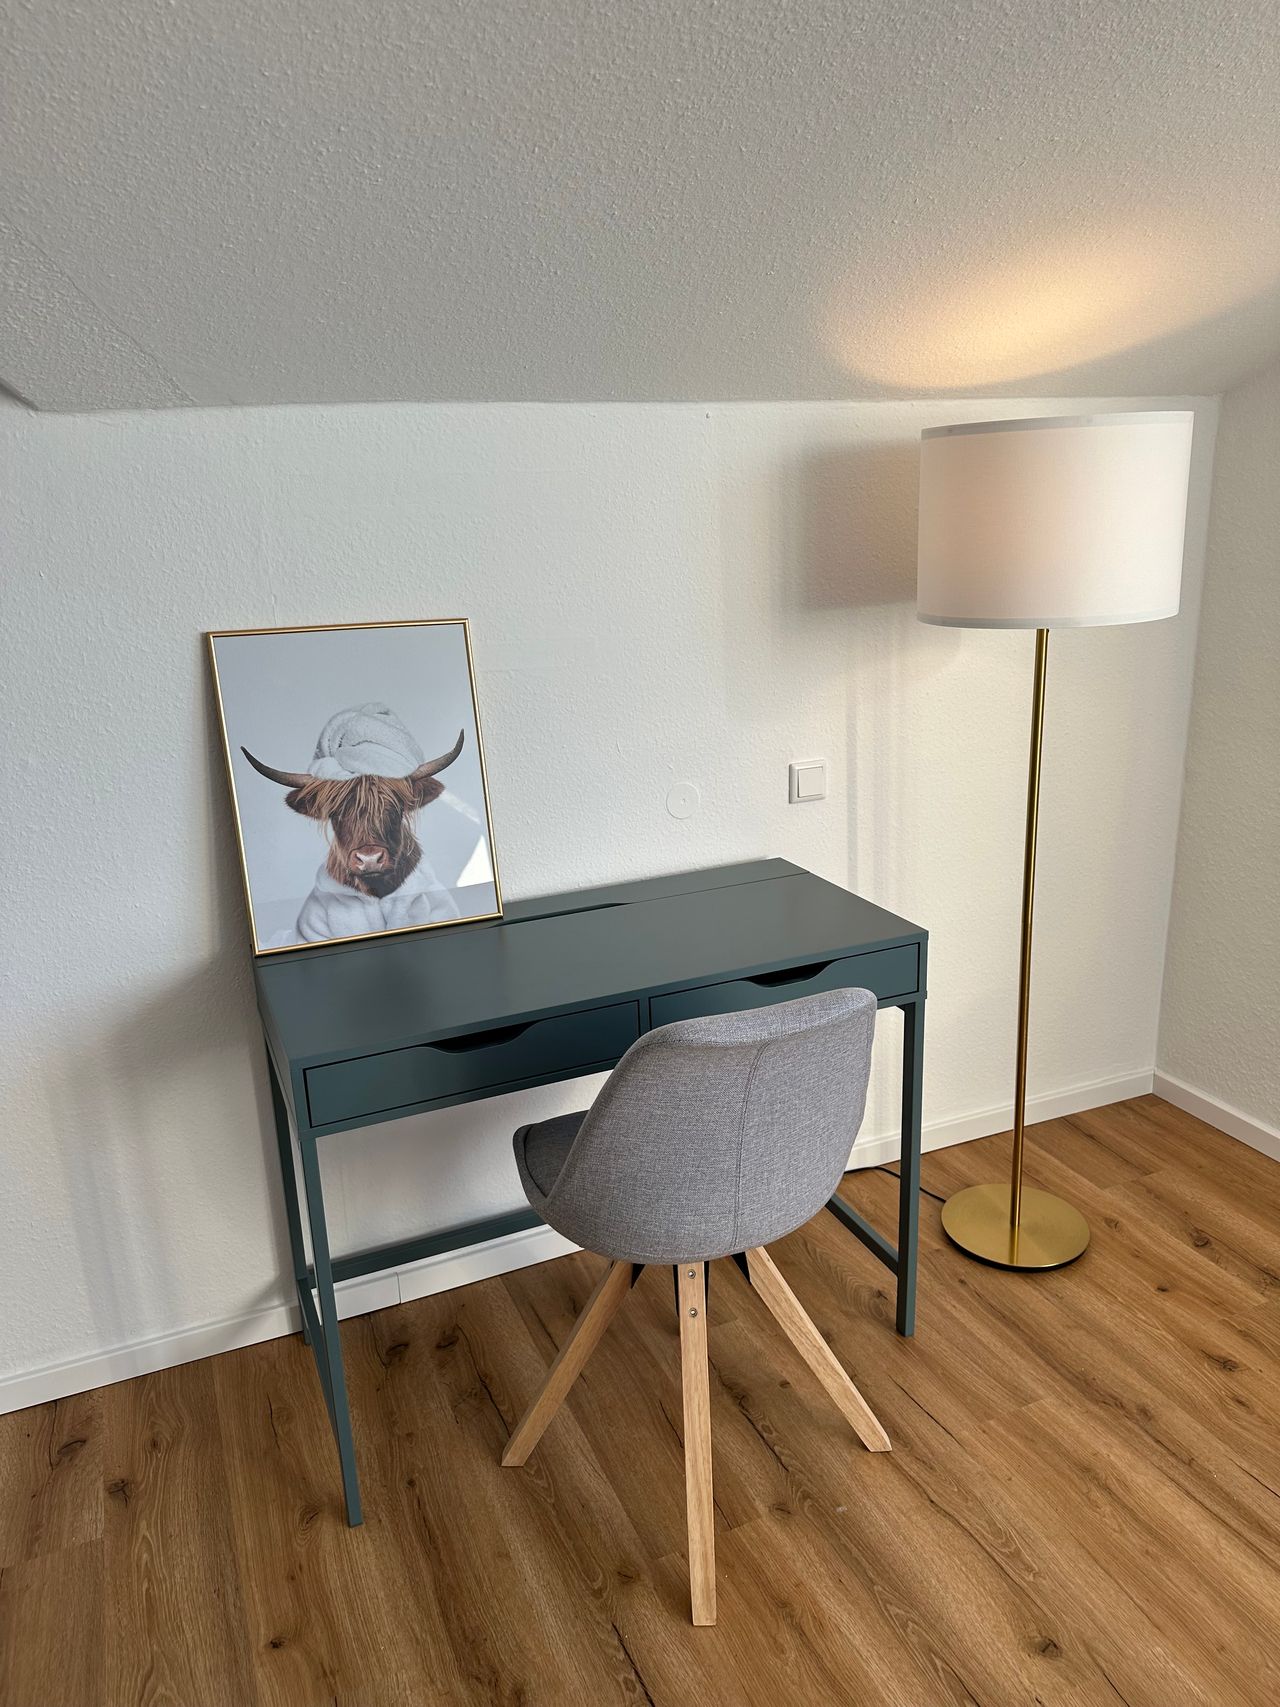 Modern, newly renovated apartment ,3 bedrooms for up to 7 people on Mönchengladbach's Hindenburgstraße, Within Walking Distance to the Main Train Station